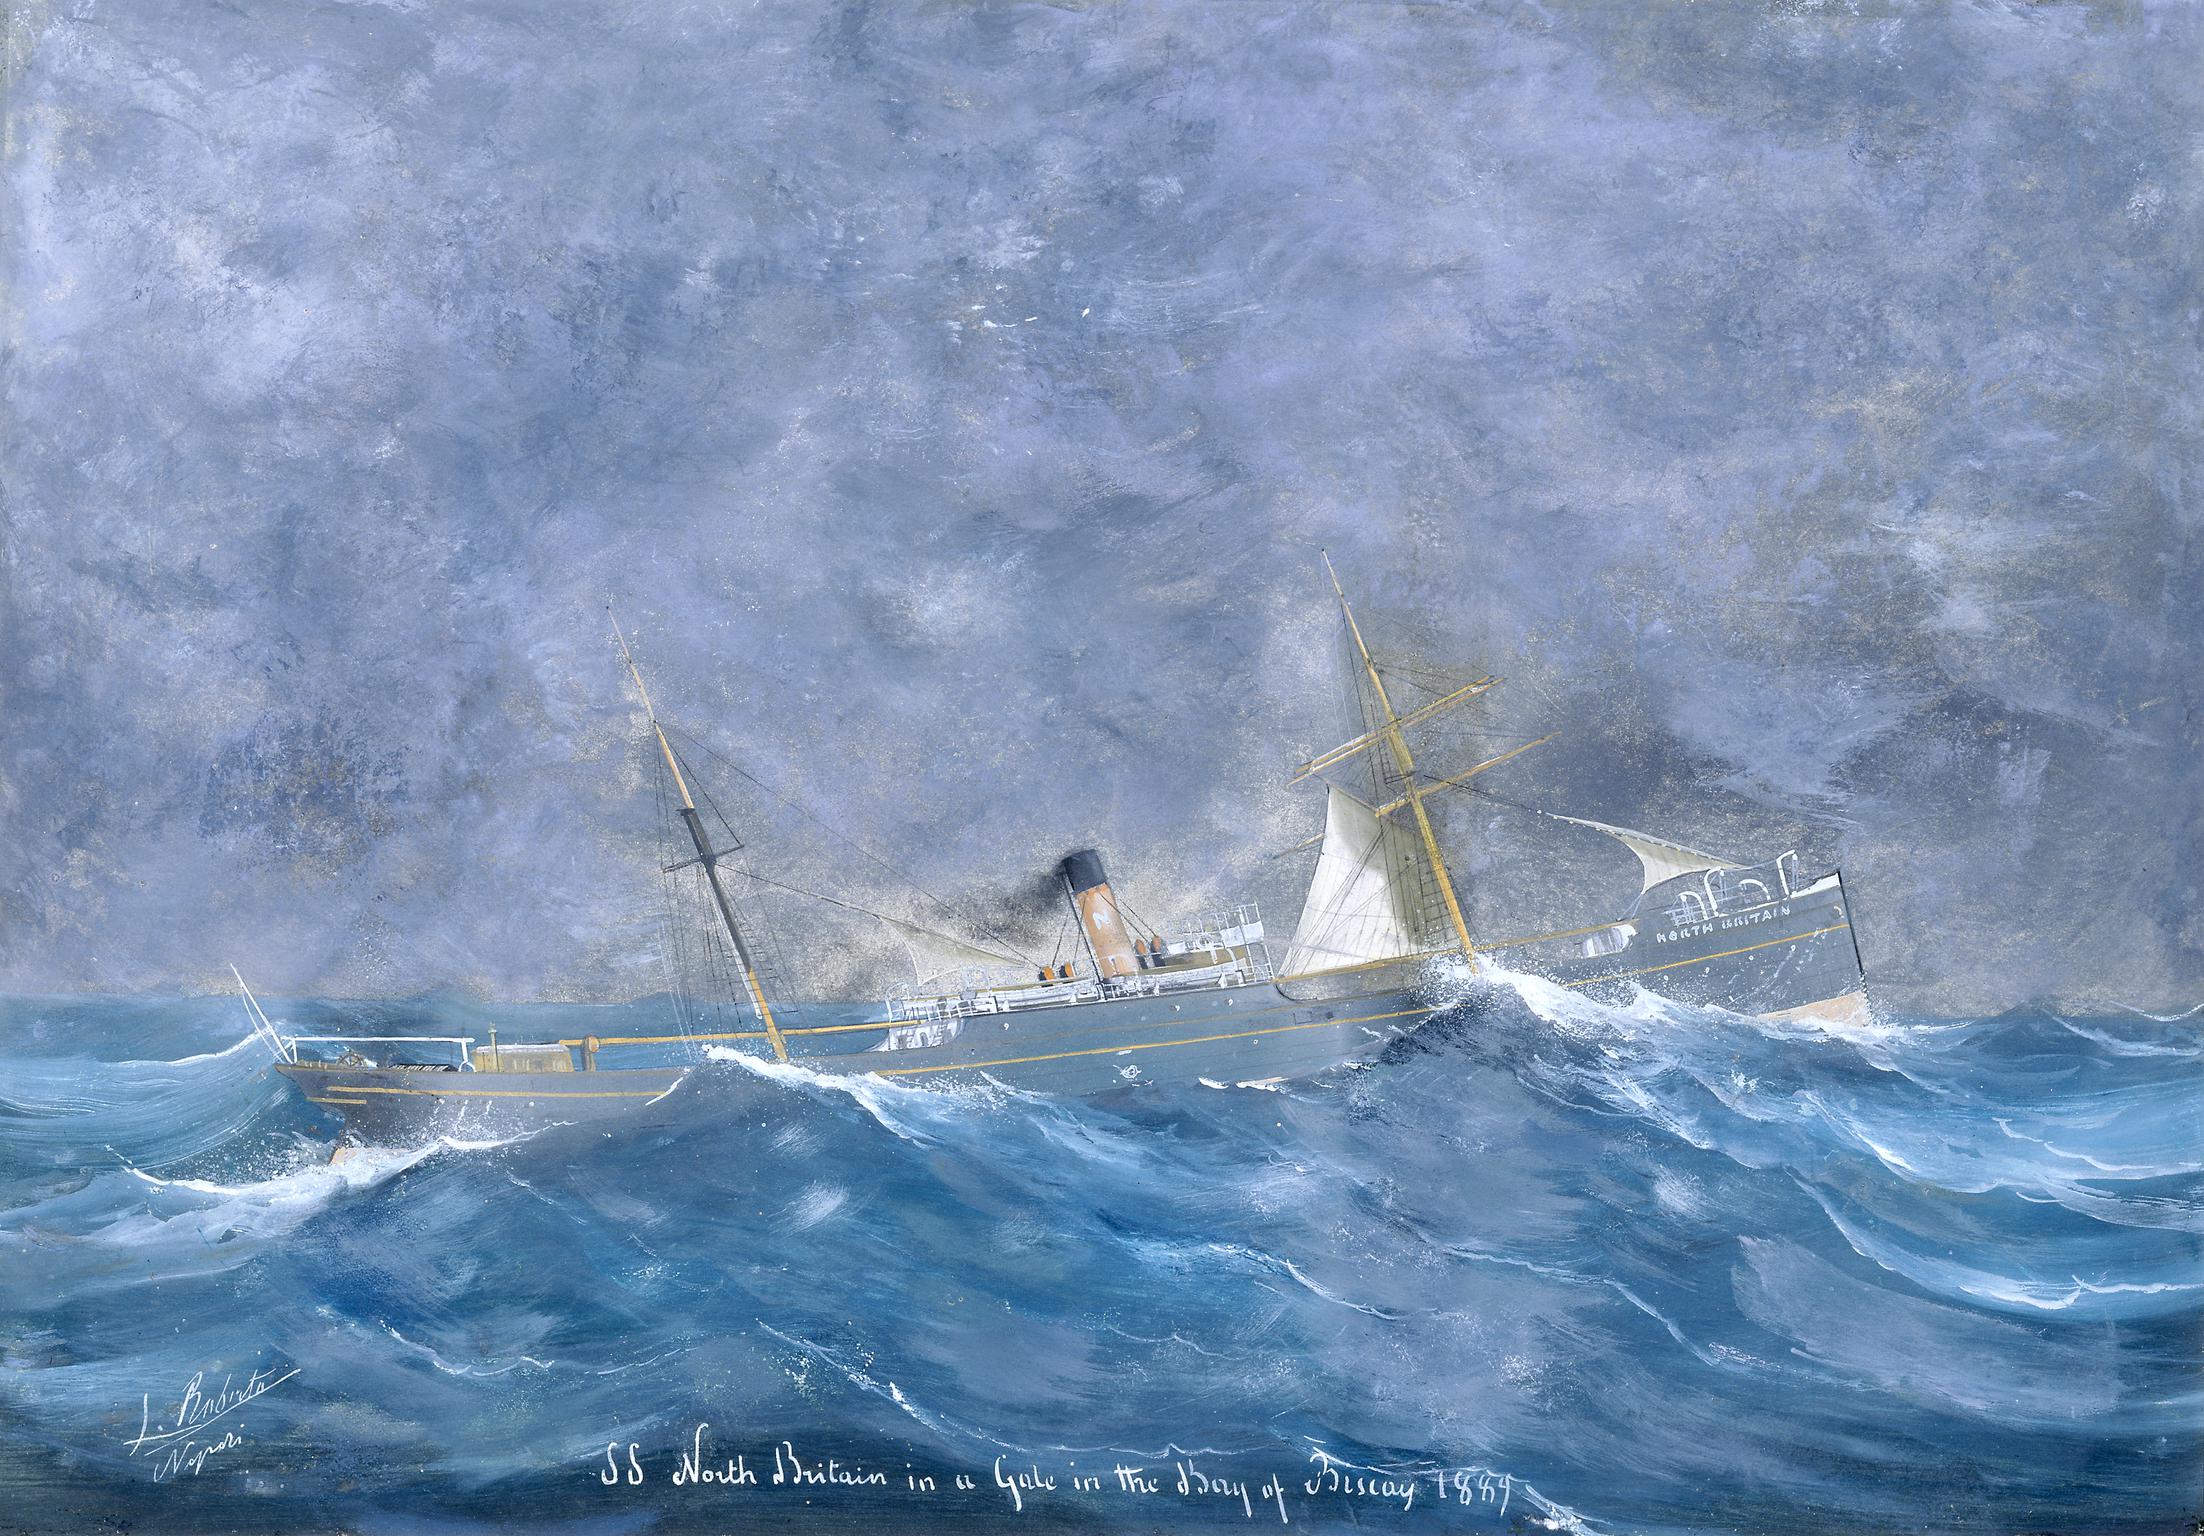 S.S. NORTH BRITAIN in a Gale, Bay of Biscay 1889 (painting)